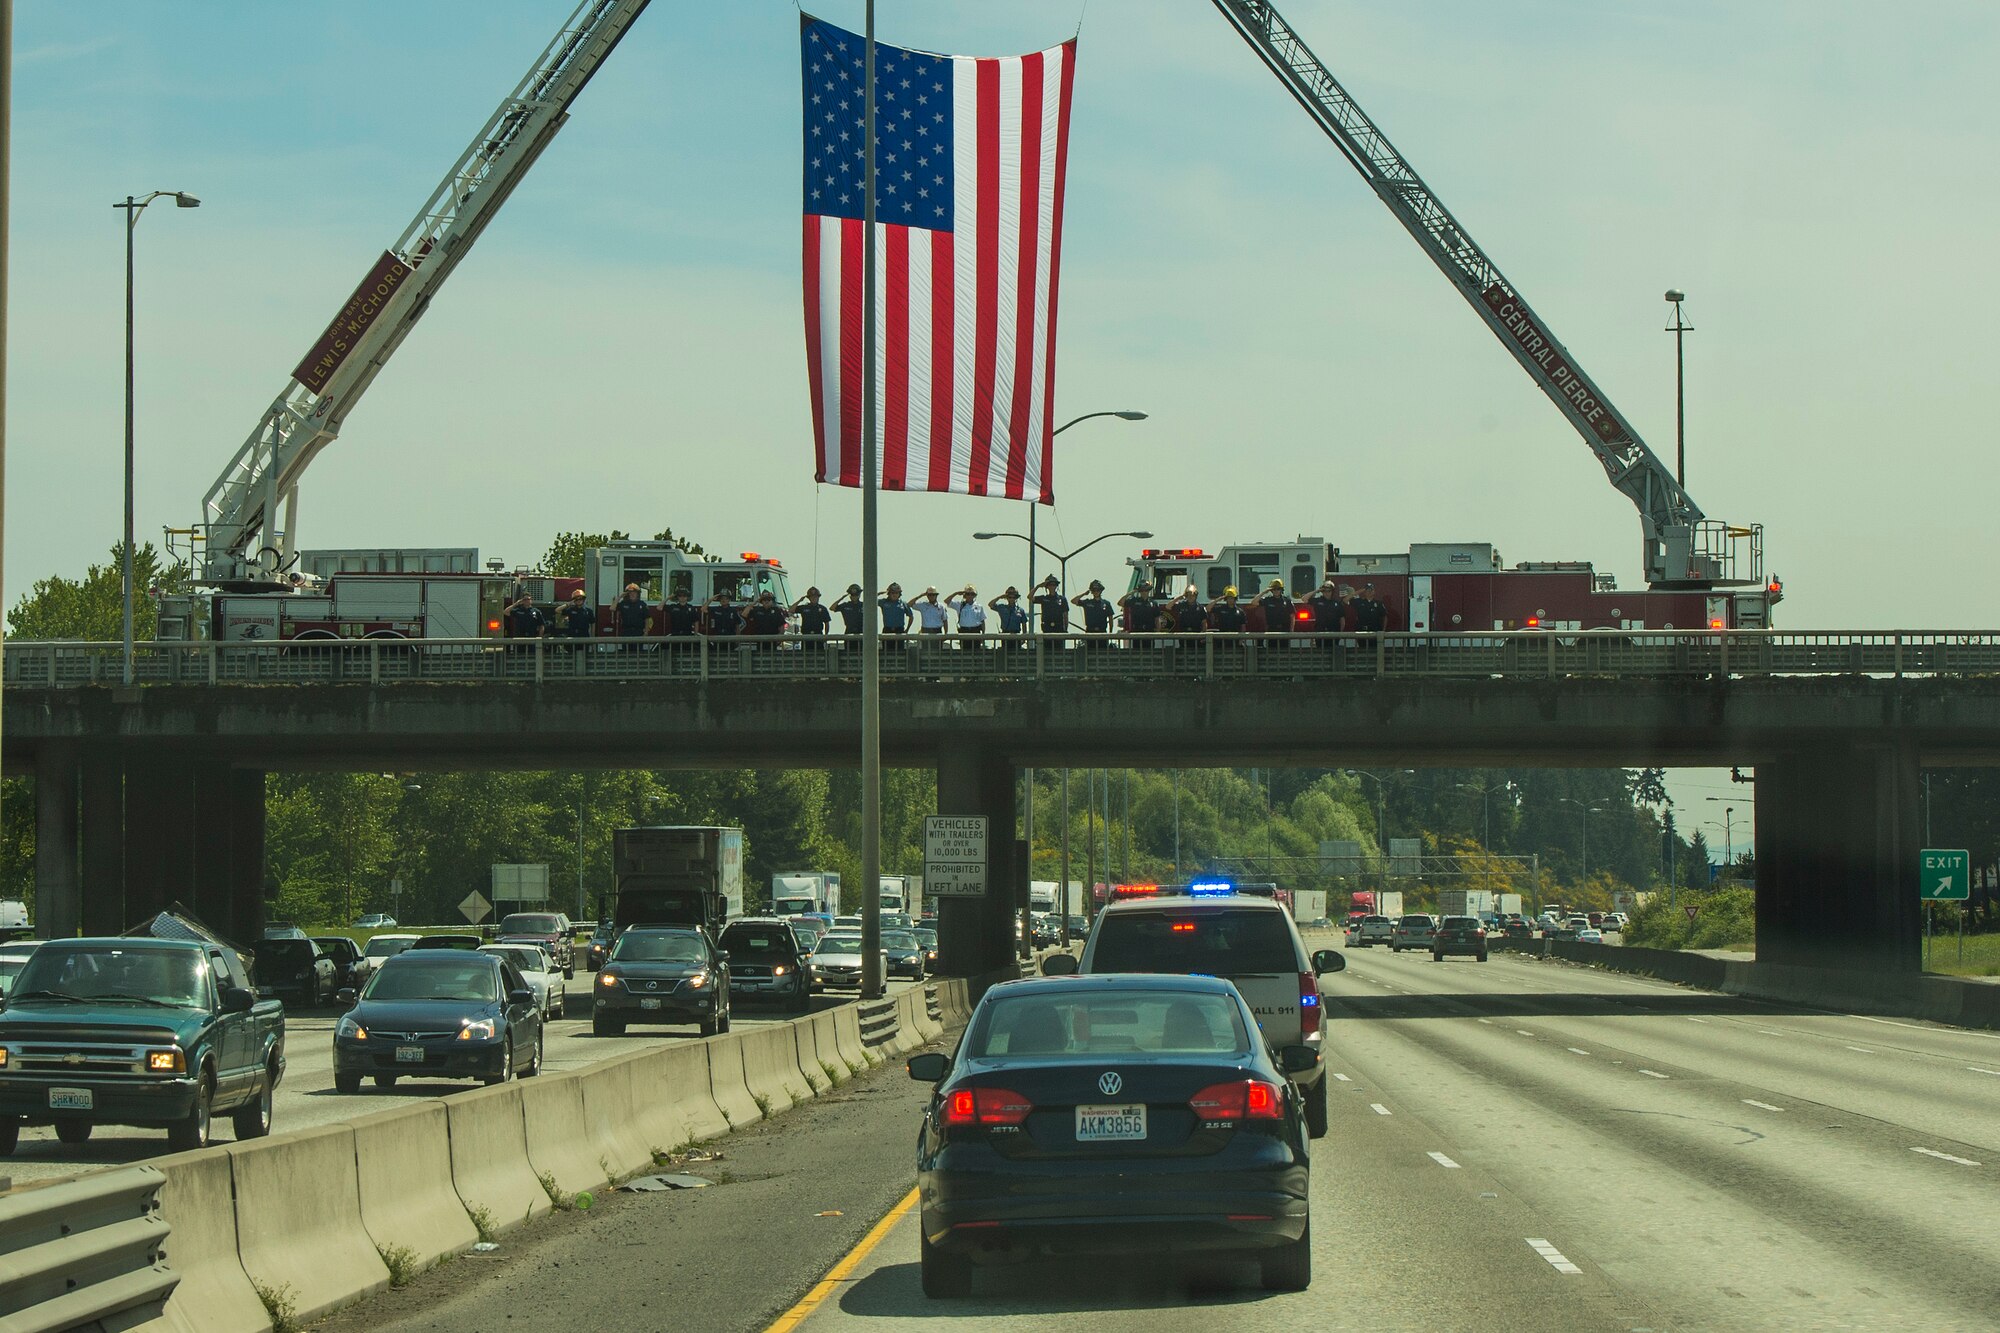 Central Pierce and Joint Base Lewis-McChord firefighters salute the procession of Air Force Capt. Douglas D. Ferguson's remains May 1, 2014, on an overpass in Tacoma, Wash. Ferguson, a Tacoma native, was killed while on a reconnaissance mission over Laos when his aircraft was shot down Dec. 30, 1969. (U.S. Air Force photo/Tech. Sgt. Sean Tobin)